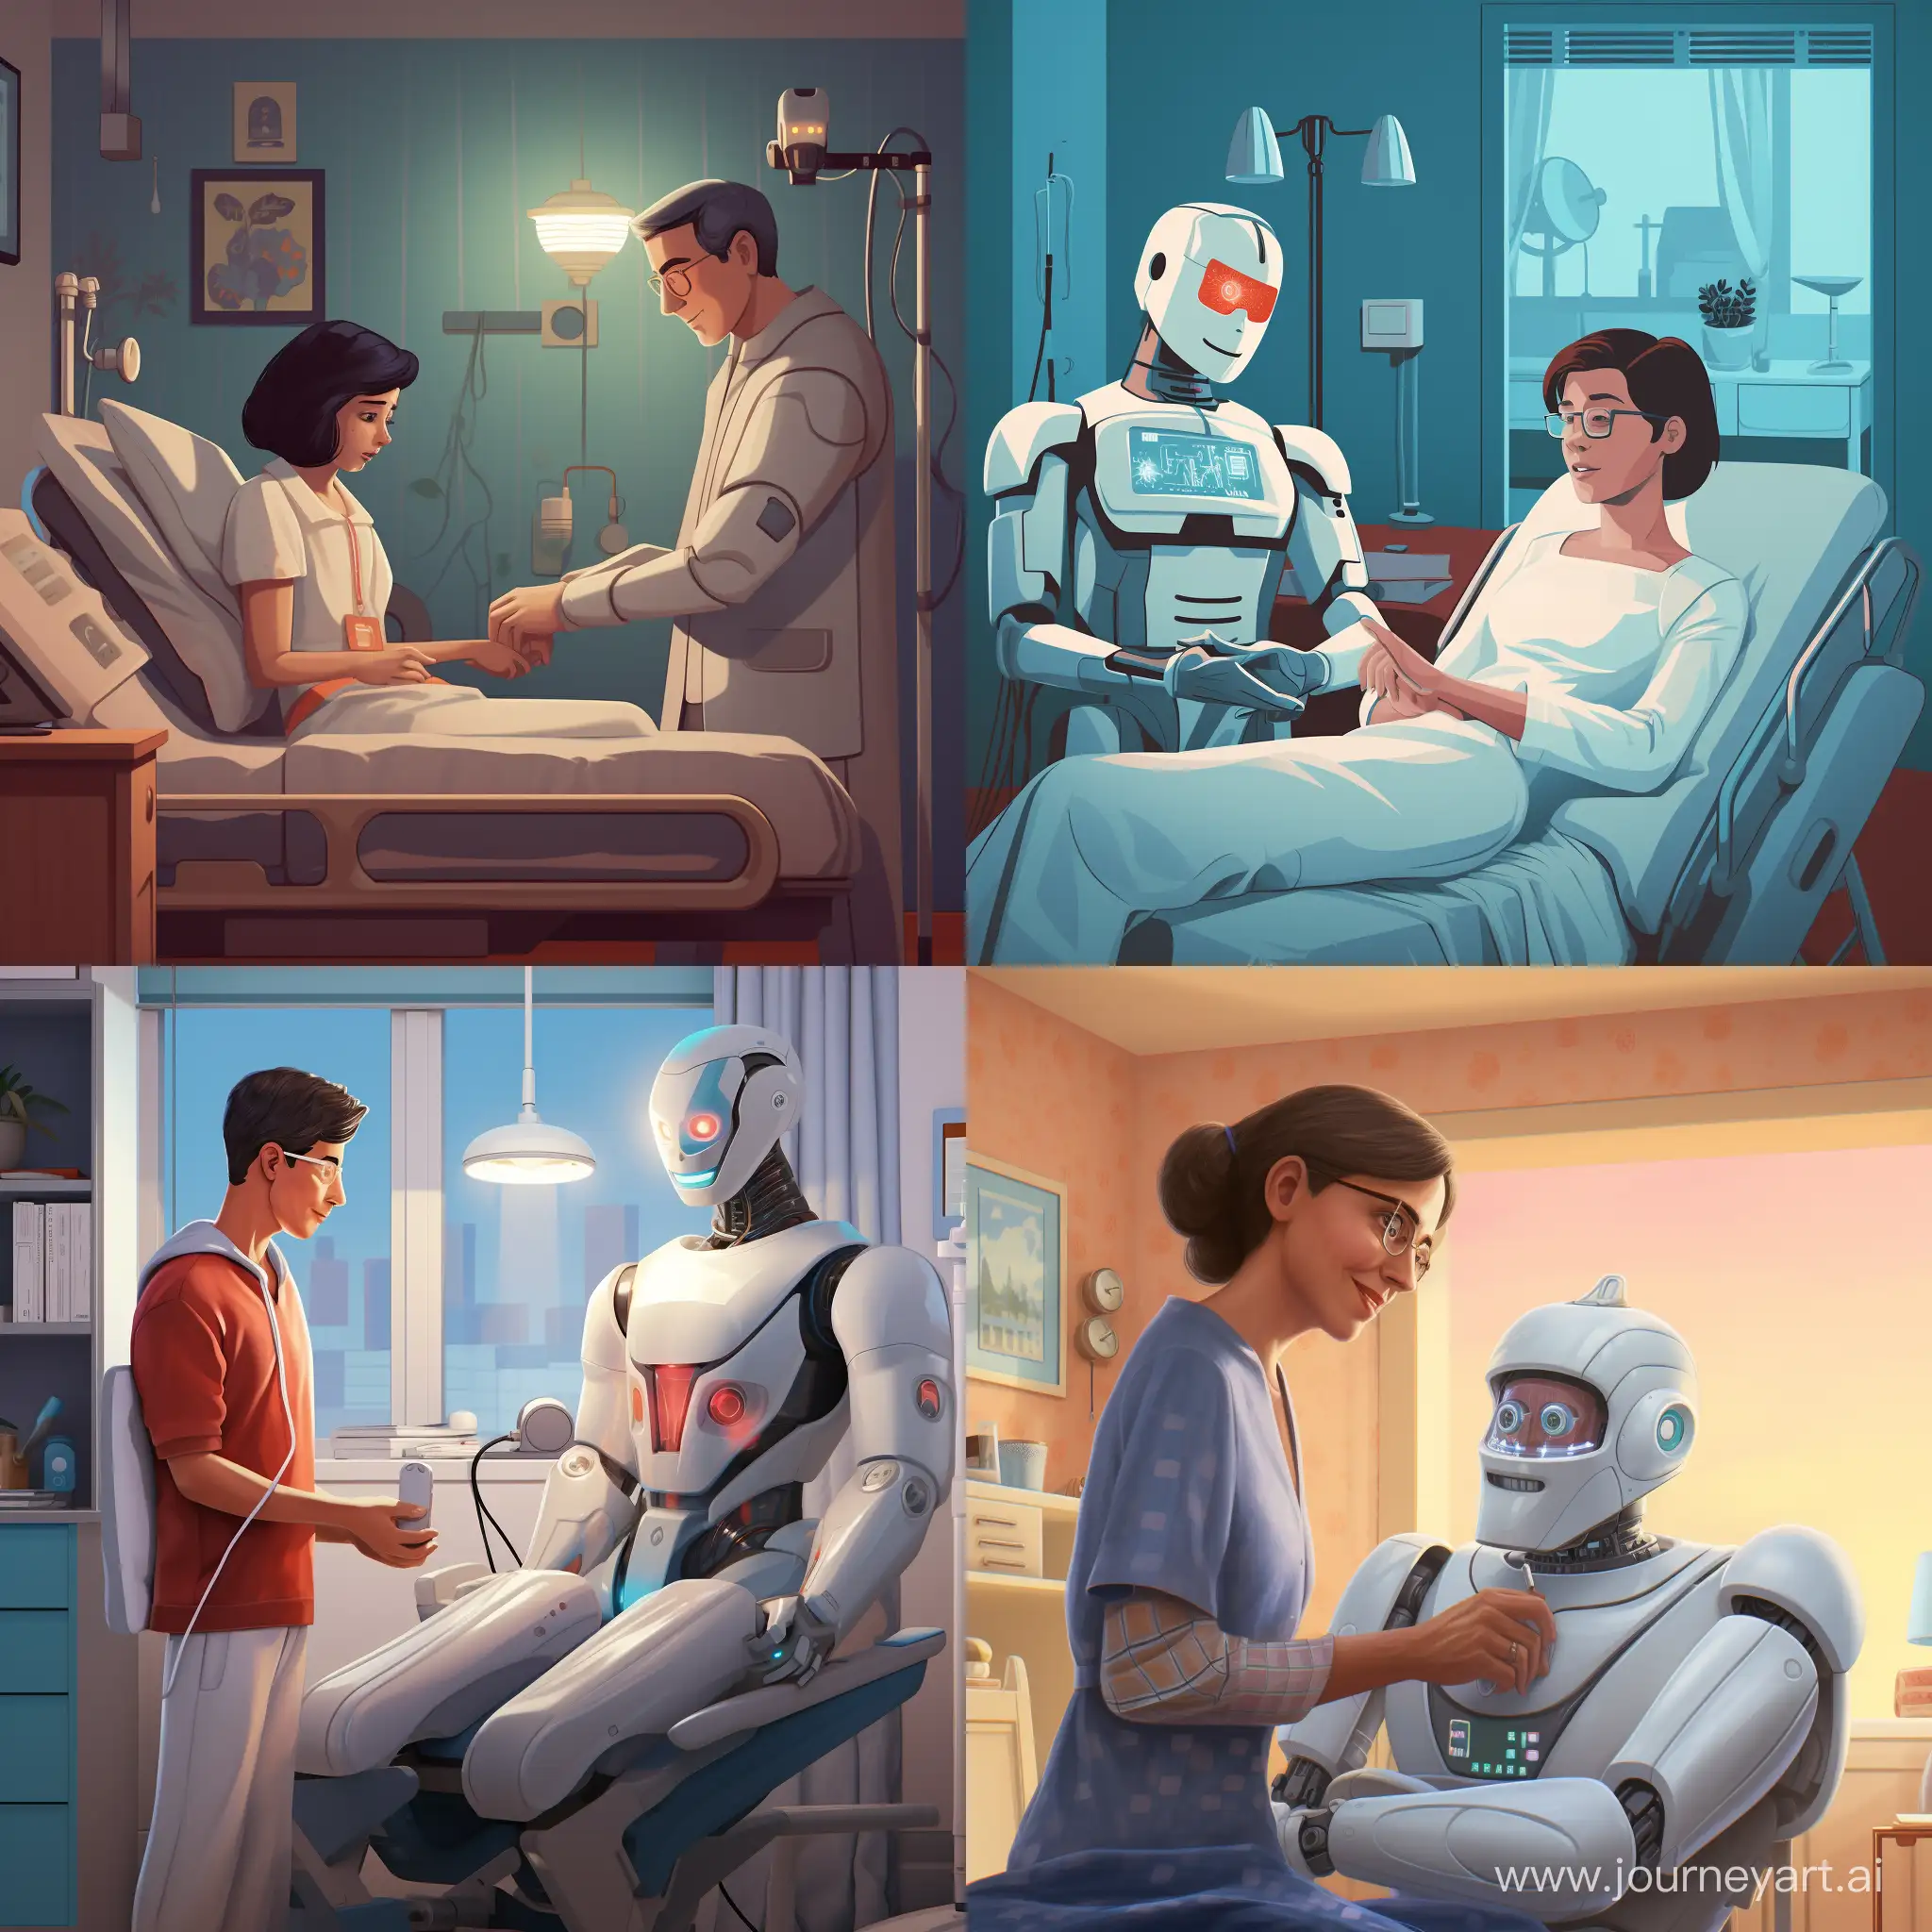 A robot with arms and a touch panel on the chest help a patient find their way to a room